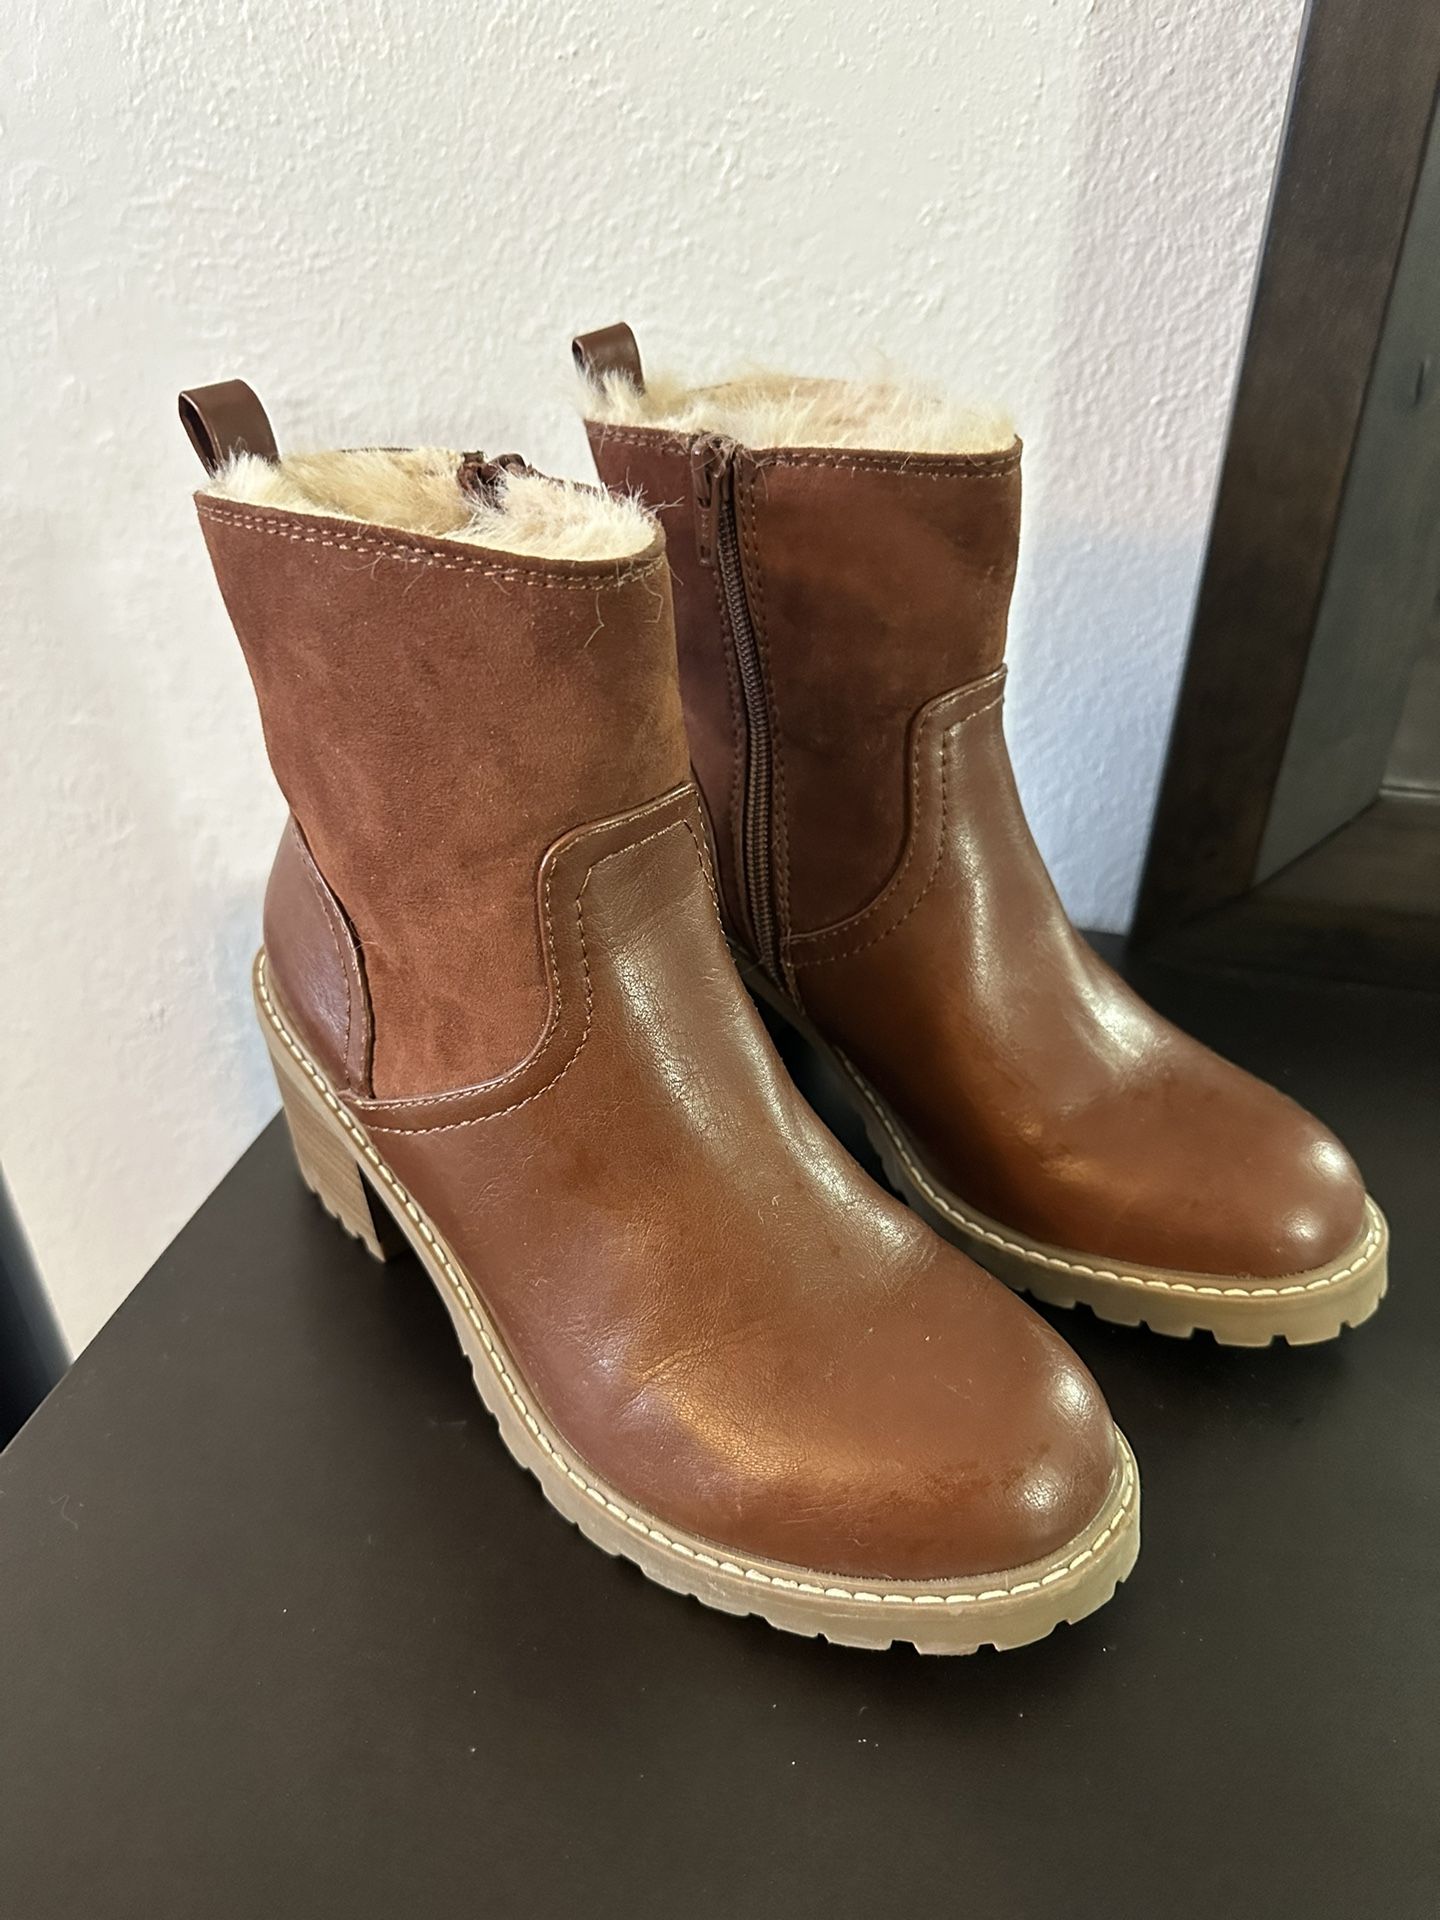 Woman’s Boots